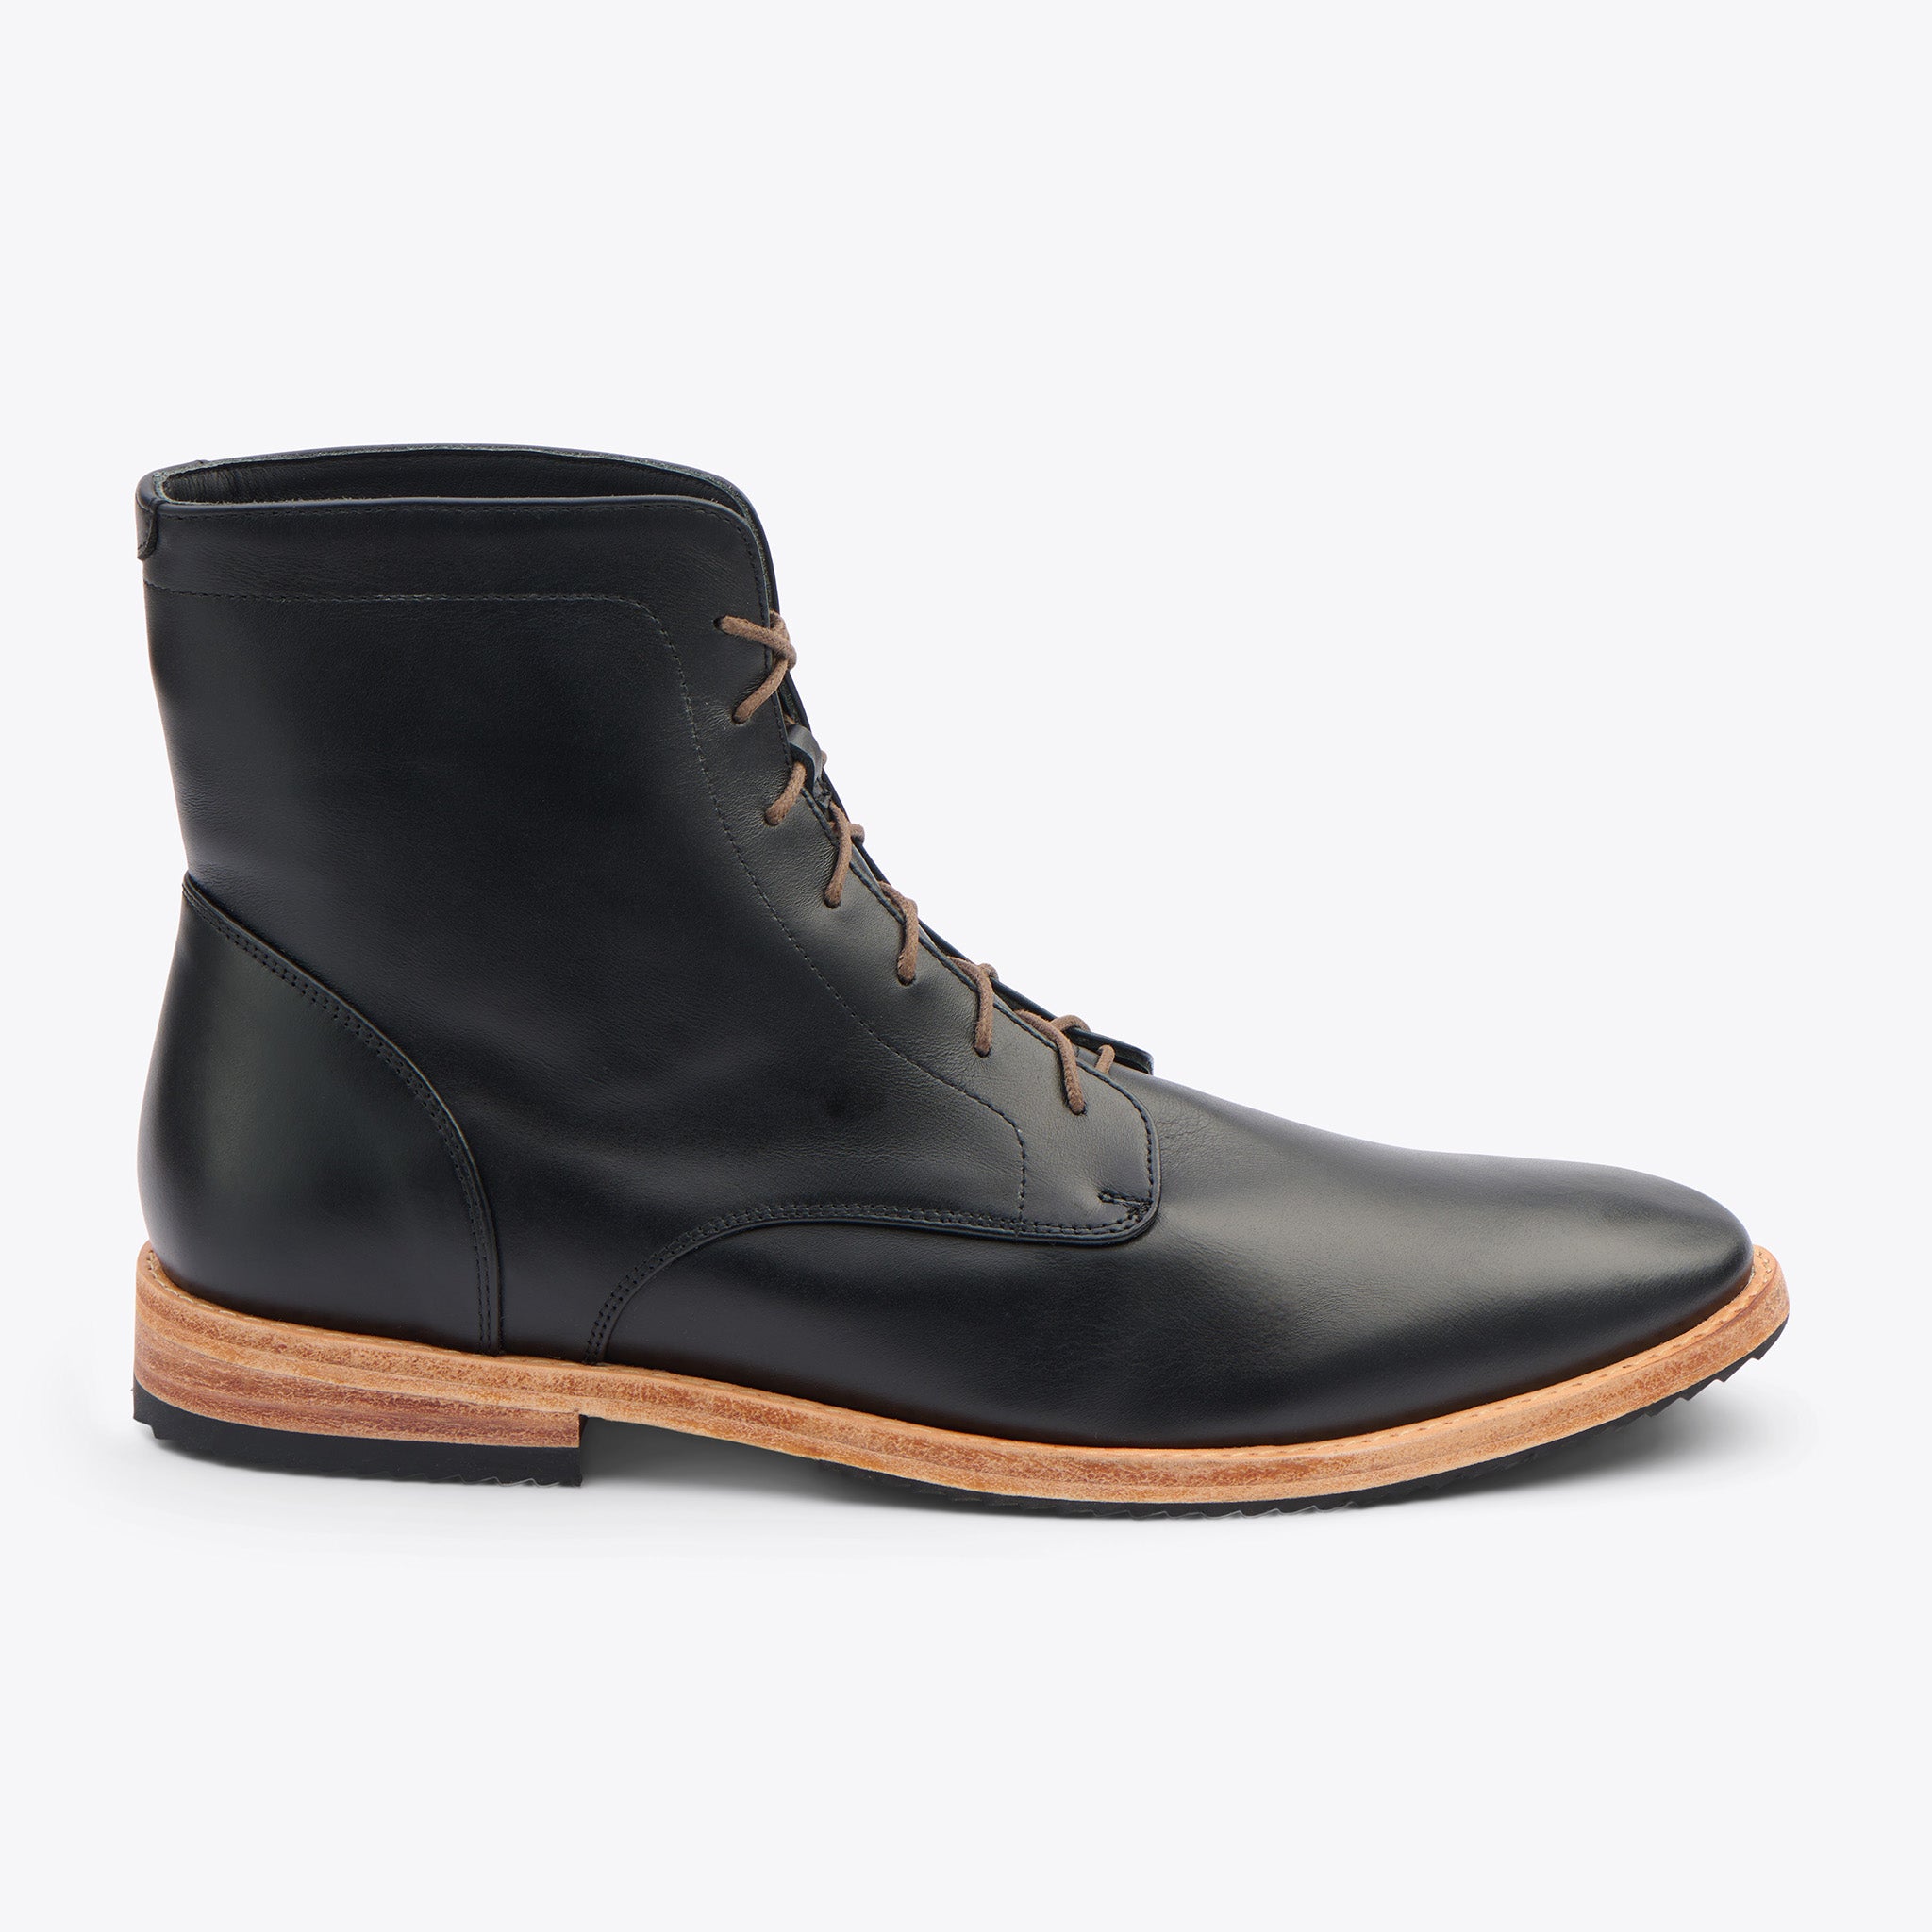 Nisolo Everyday Lace-Up Boot Black